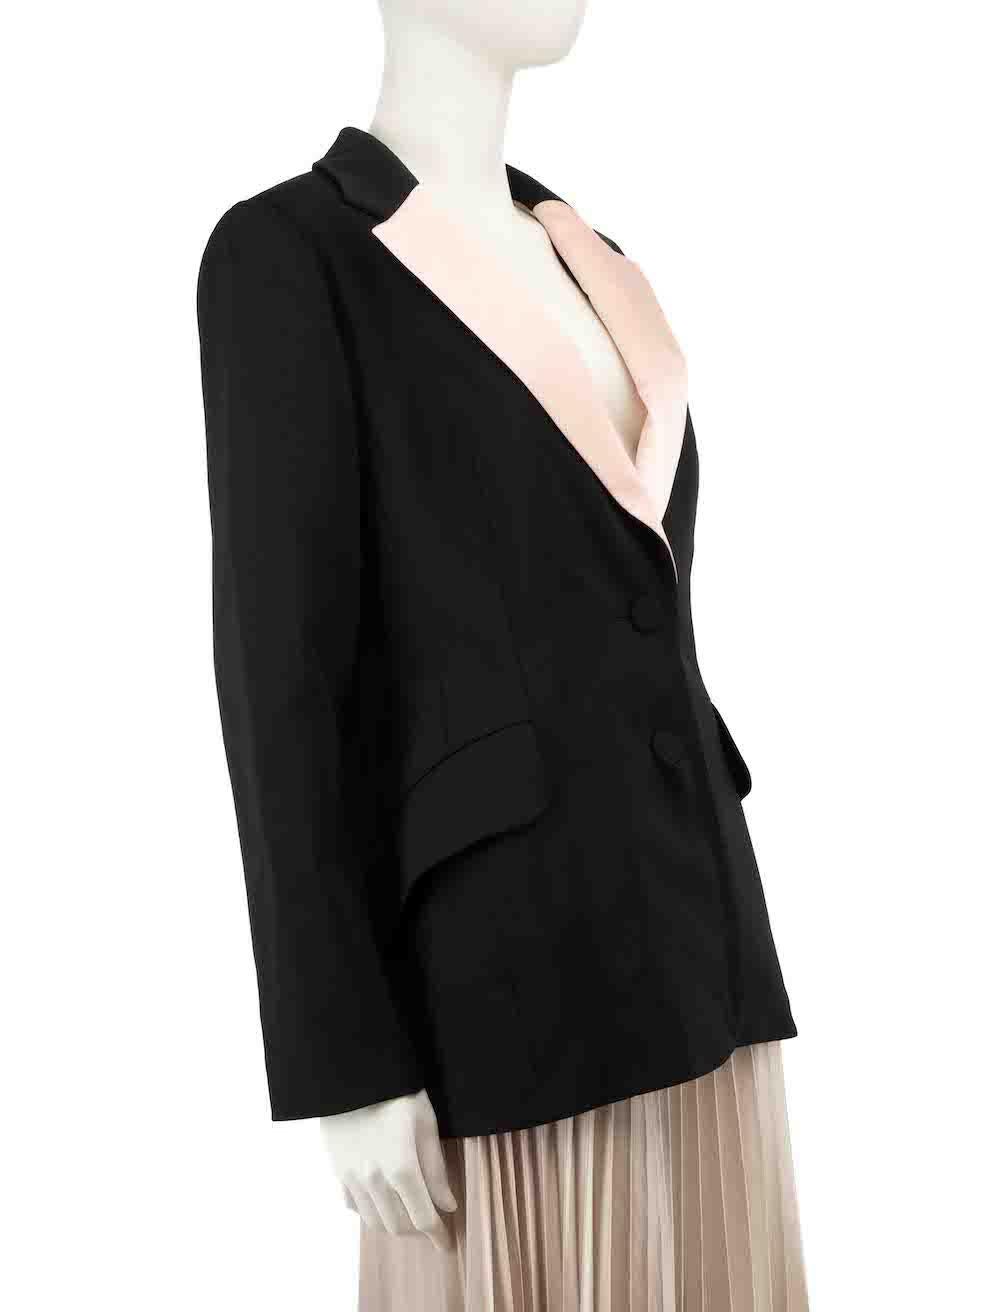 CONDITION is Never worn, with tags. No visible wear to blazer is evident on this new Carolina Herrera designer resale item.
 
 
 
 Details
 
 
 Black
 
 Wool
 
 Blazer jacket
 
 Pink satin lapel
 
 Single breasted
 
 Chest pocket
 
 2x Front side